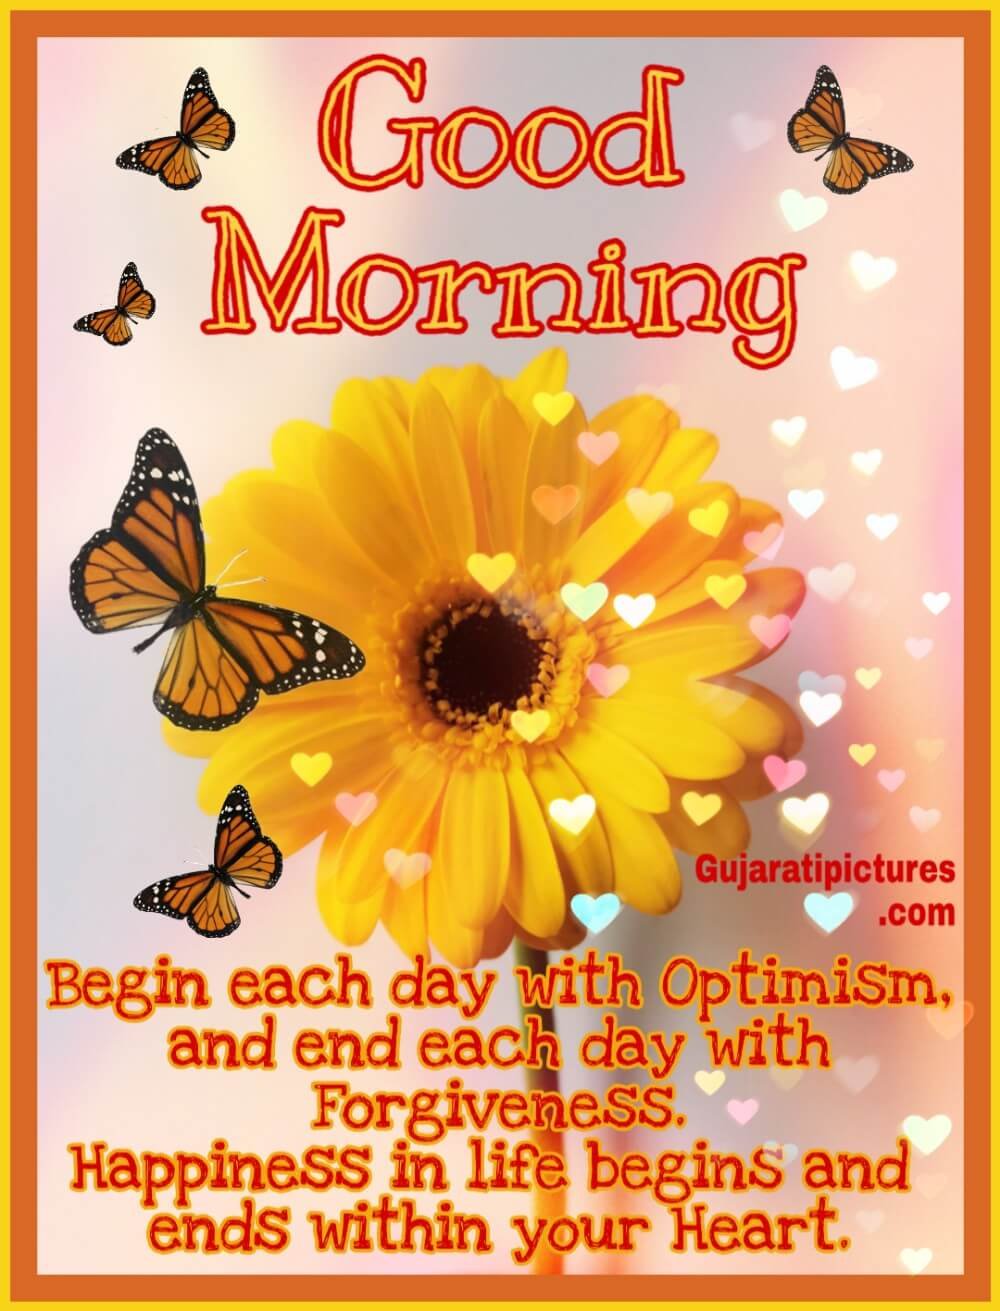 Good Morning Message - Gujarati Pictures – Website Dedicated to ...